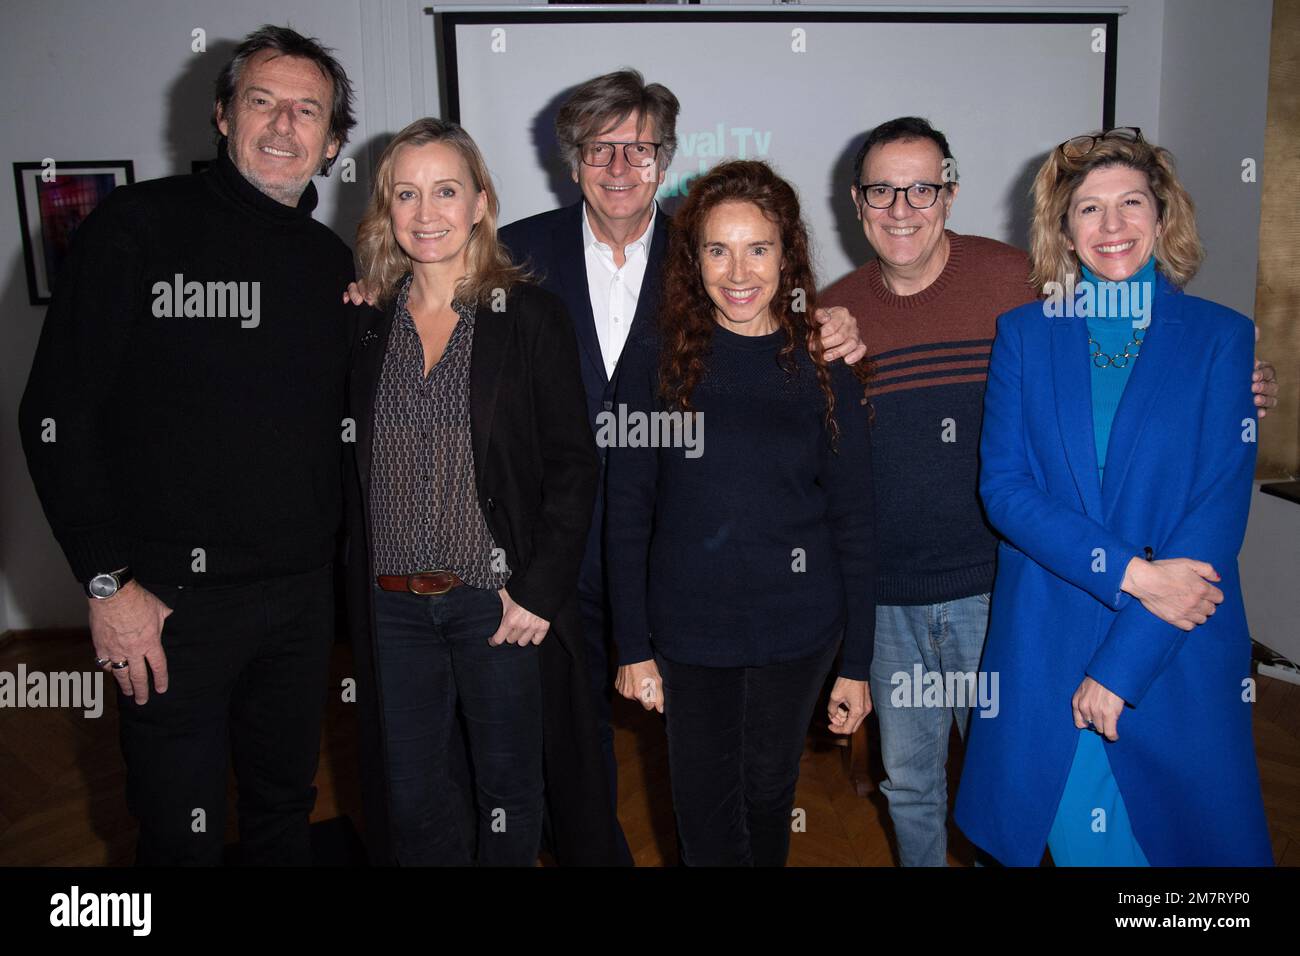 Paris, France on January 10, 2023. Jean-Luc Reichmann, Catherine Marchal,  Christian Cappe, Isabel Otero, Thierry Beccaro and Juliette Tresanini  attending the Festival de Luchon 2023 Press Conference in Paris, France on  January